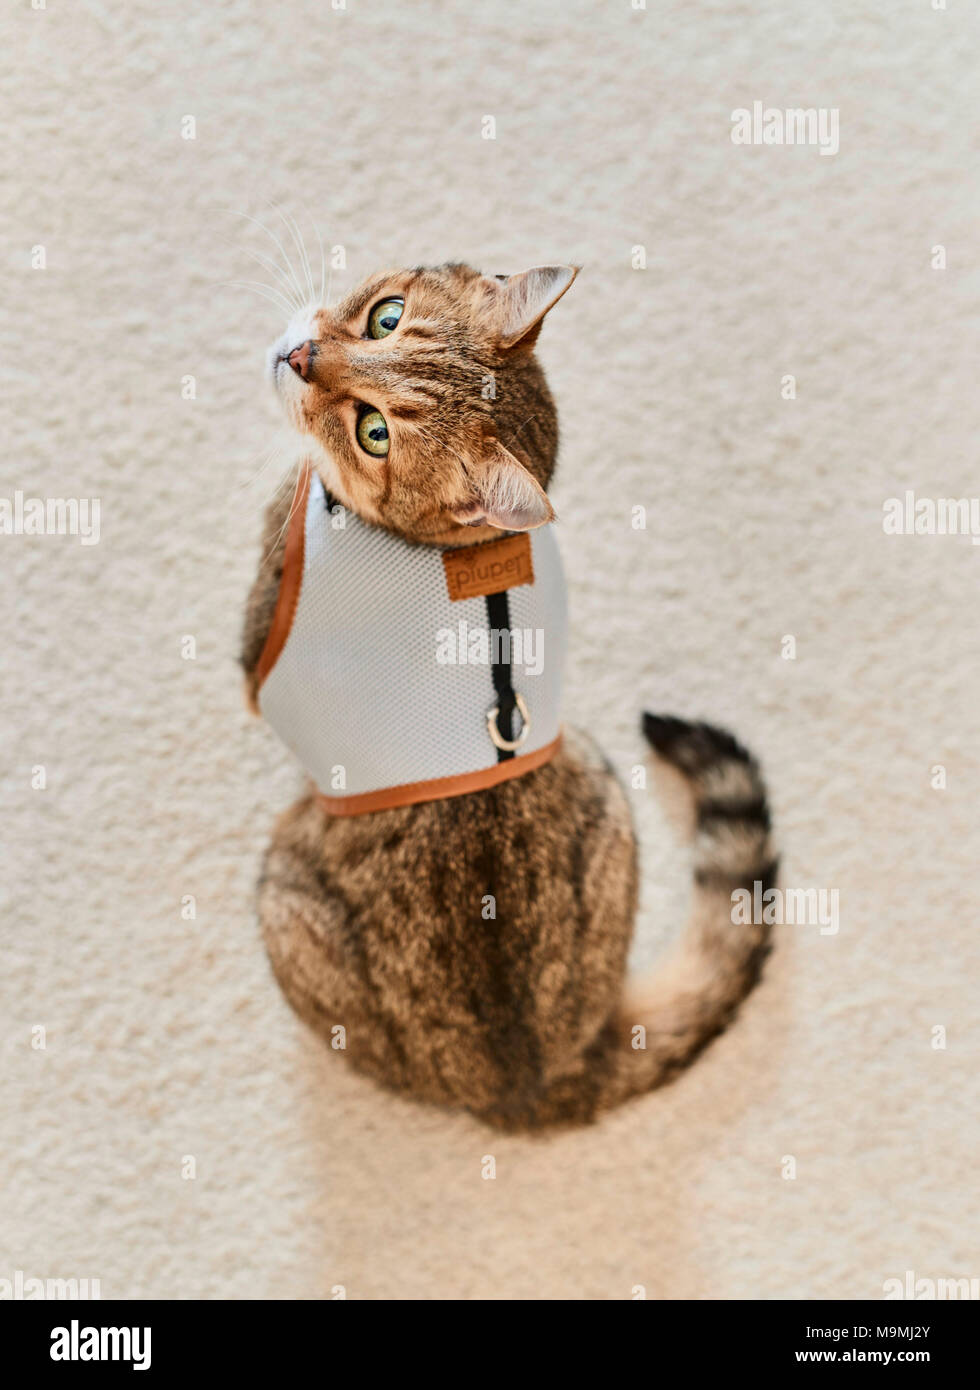 Domestic cat. Tabby adult with harness, sitting. Germany. Stock Photo